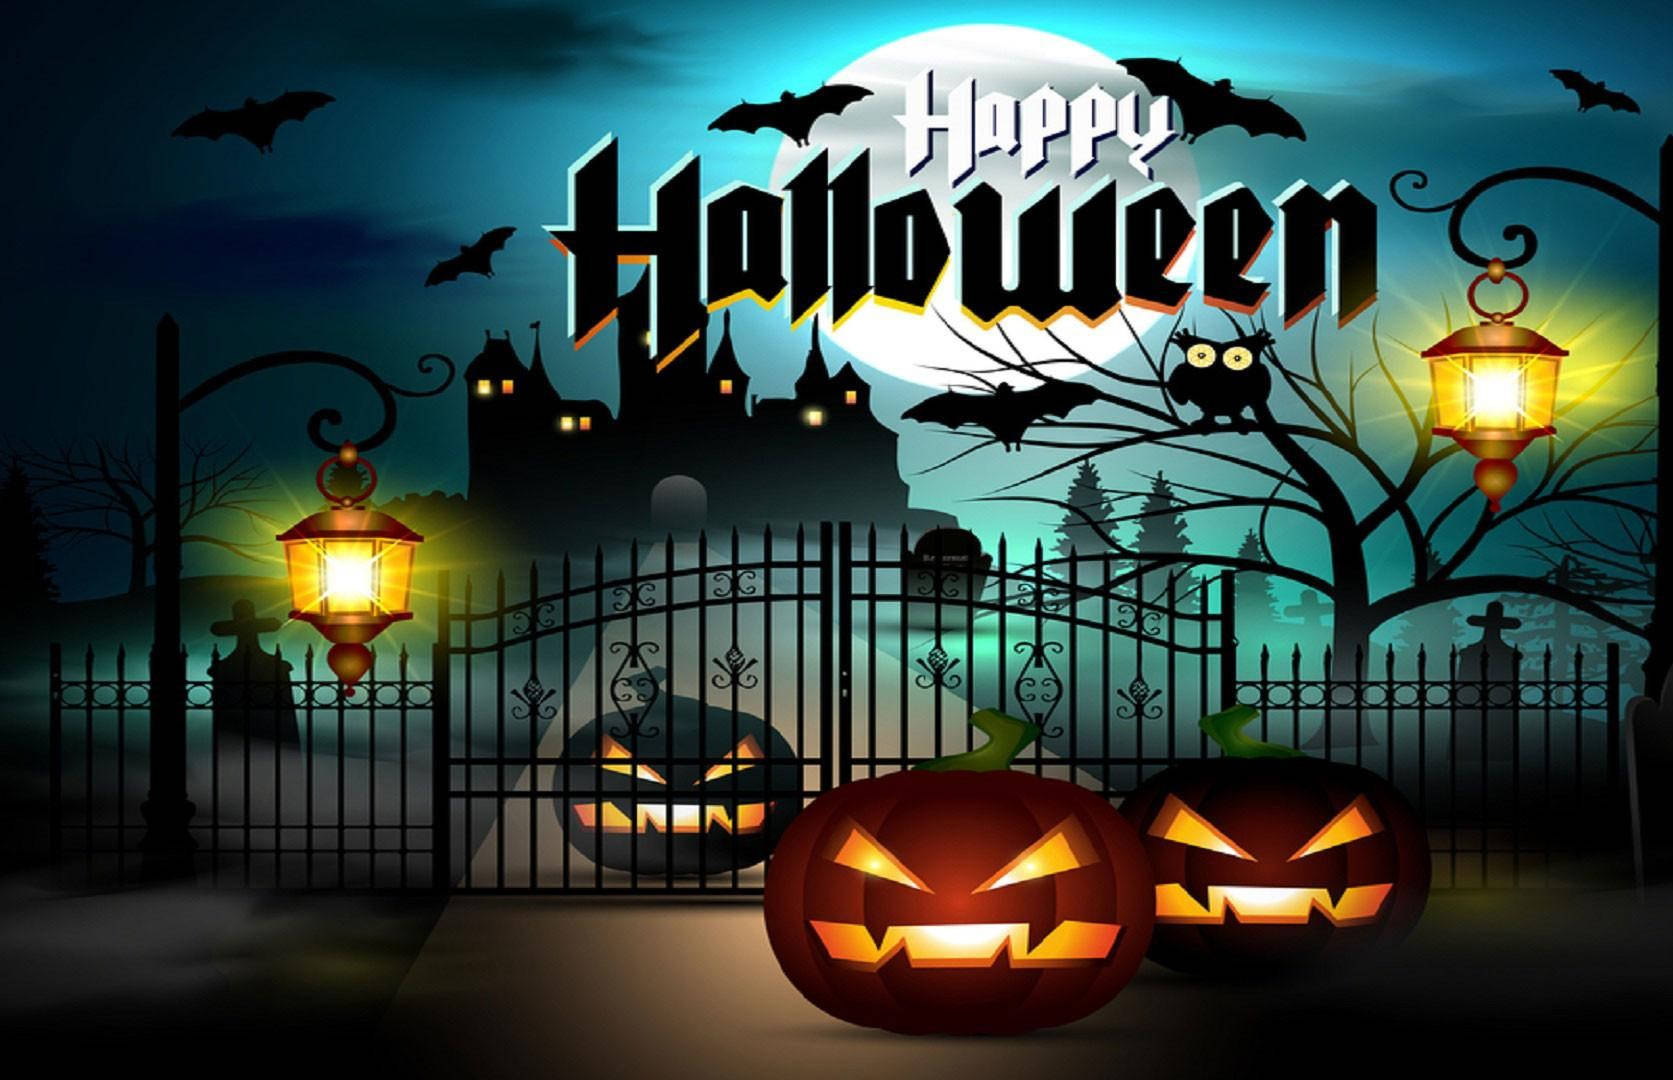 "Make the most of Happy Halloween with fun and spooky memories!" Wallpaper